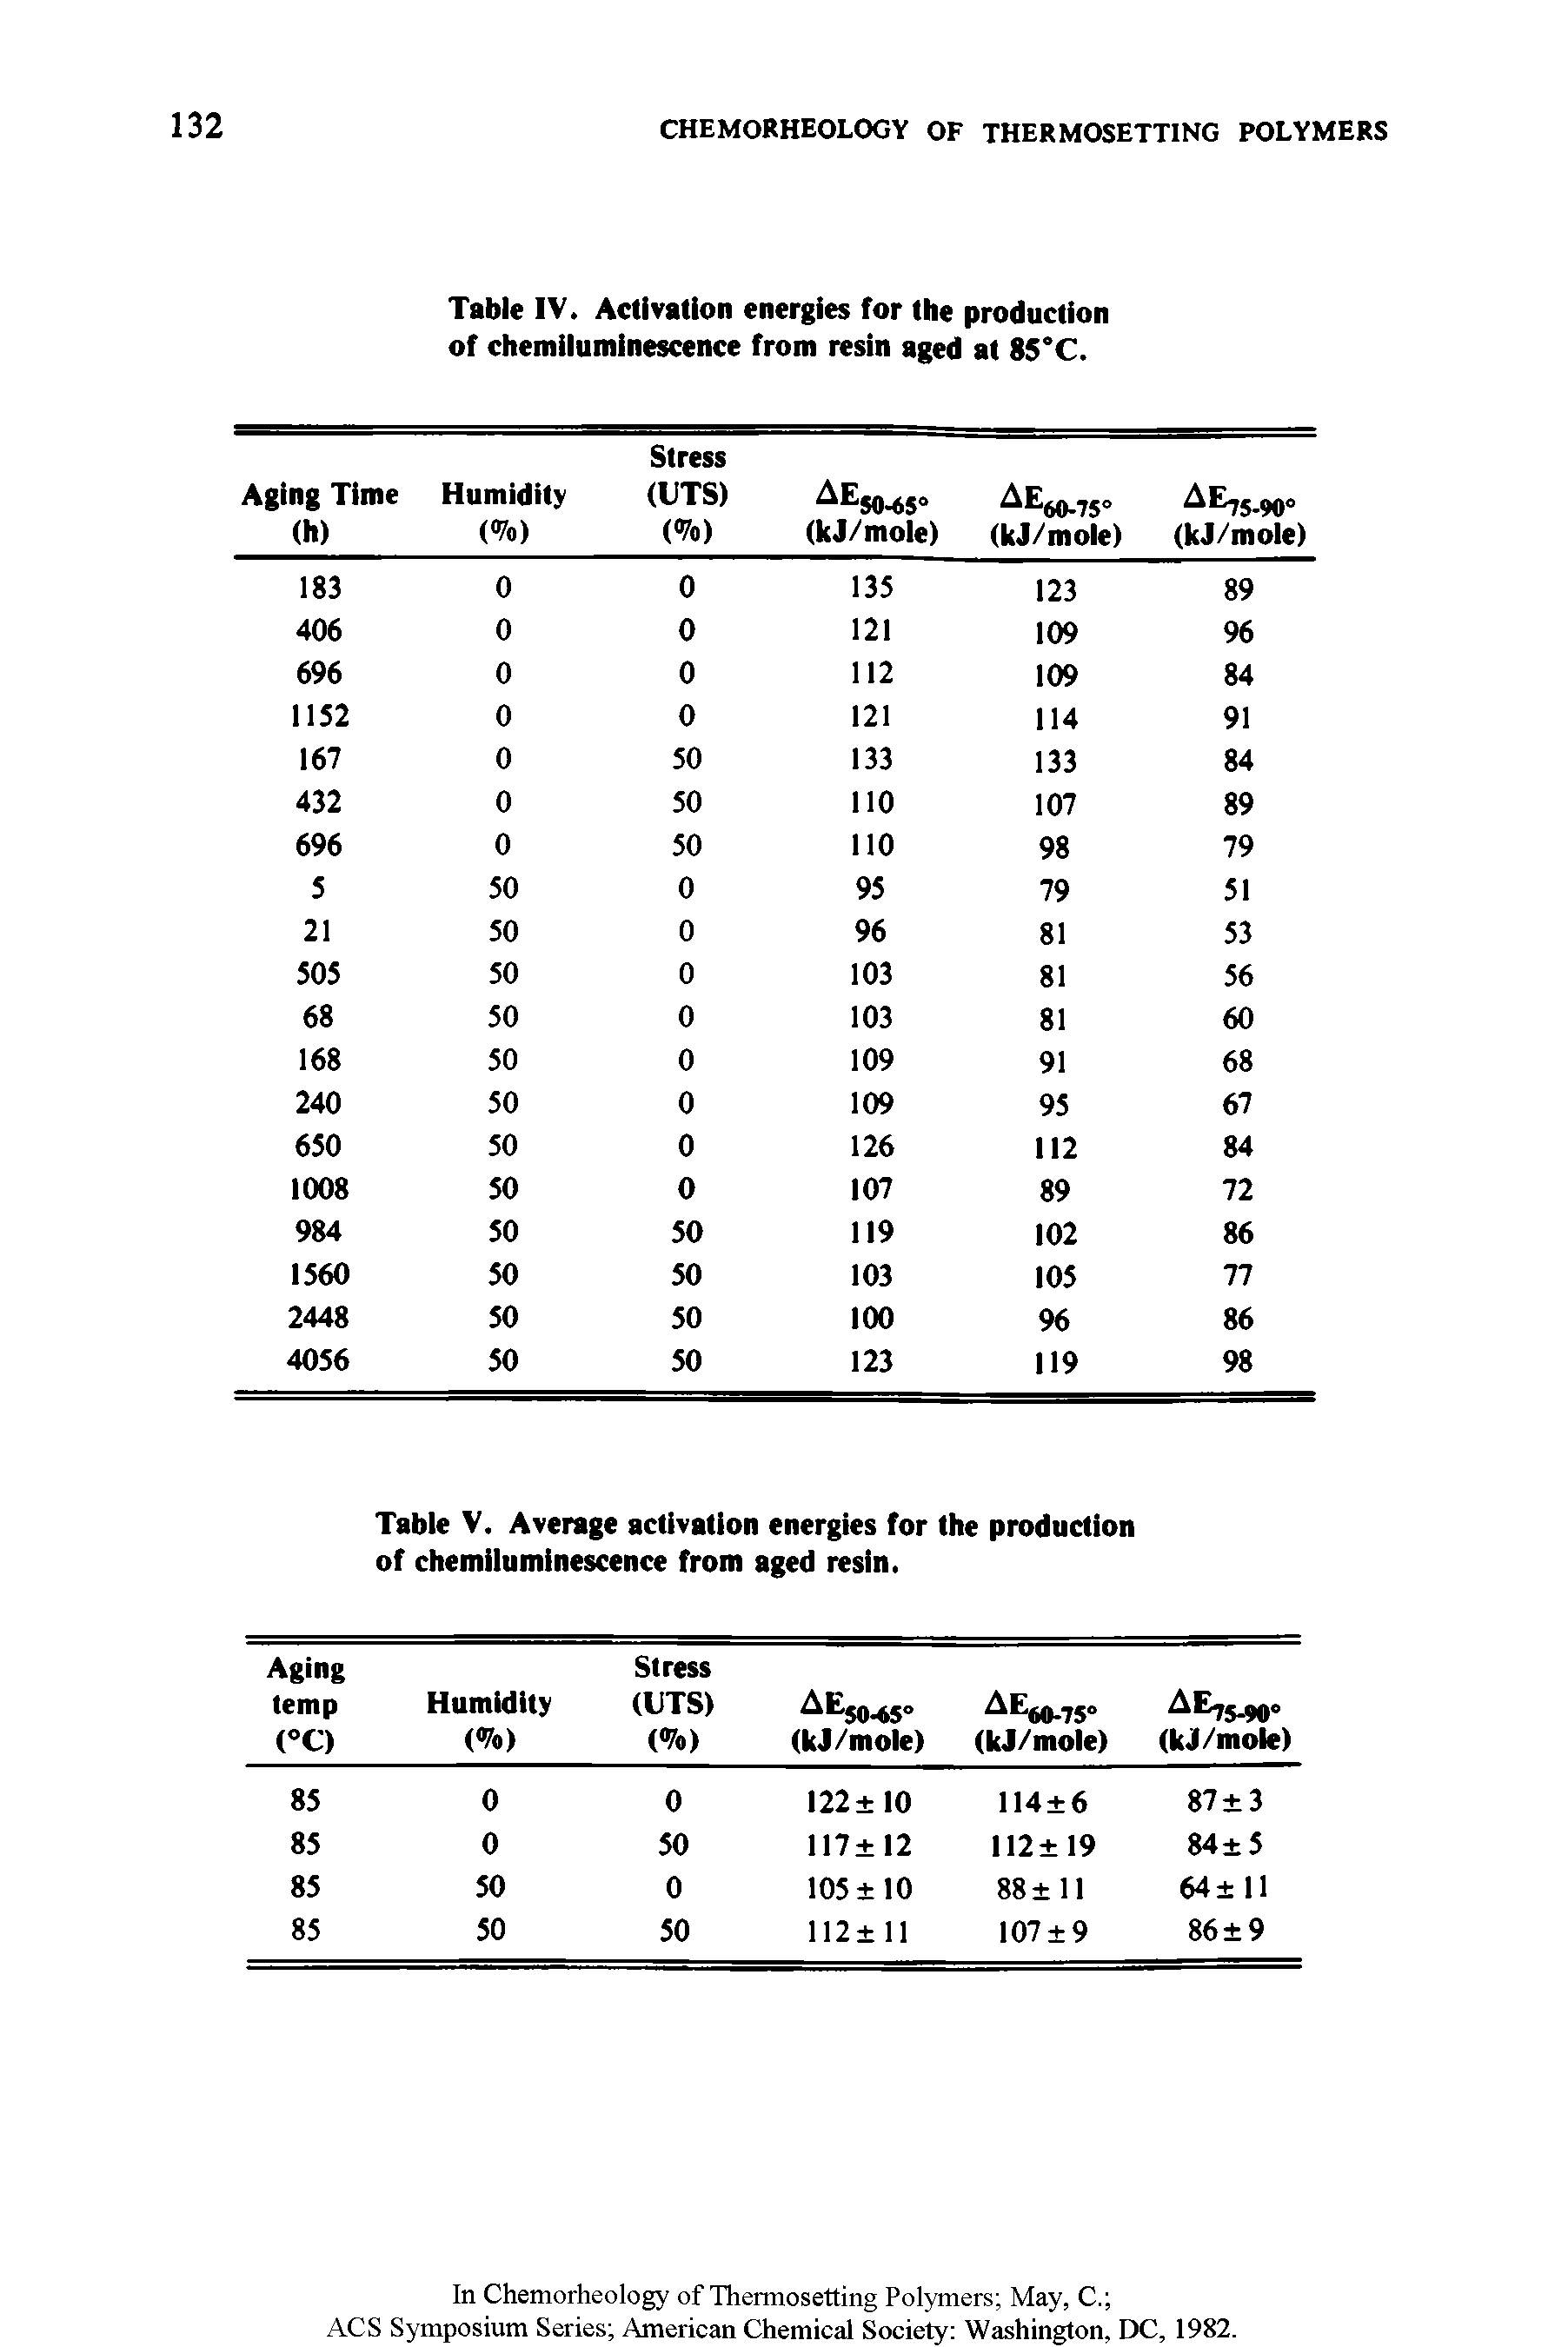 Table V. Average activation energies for the production of chemiluminescence from aged resin.